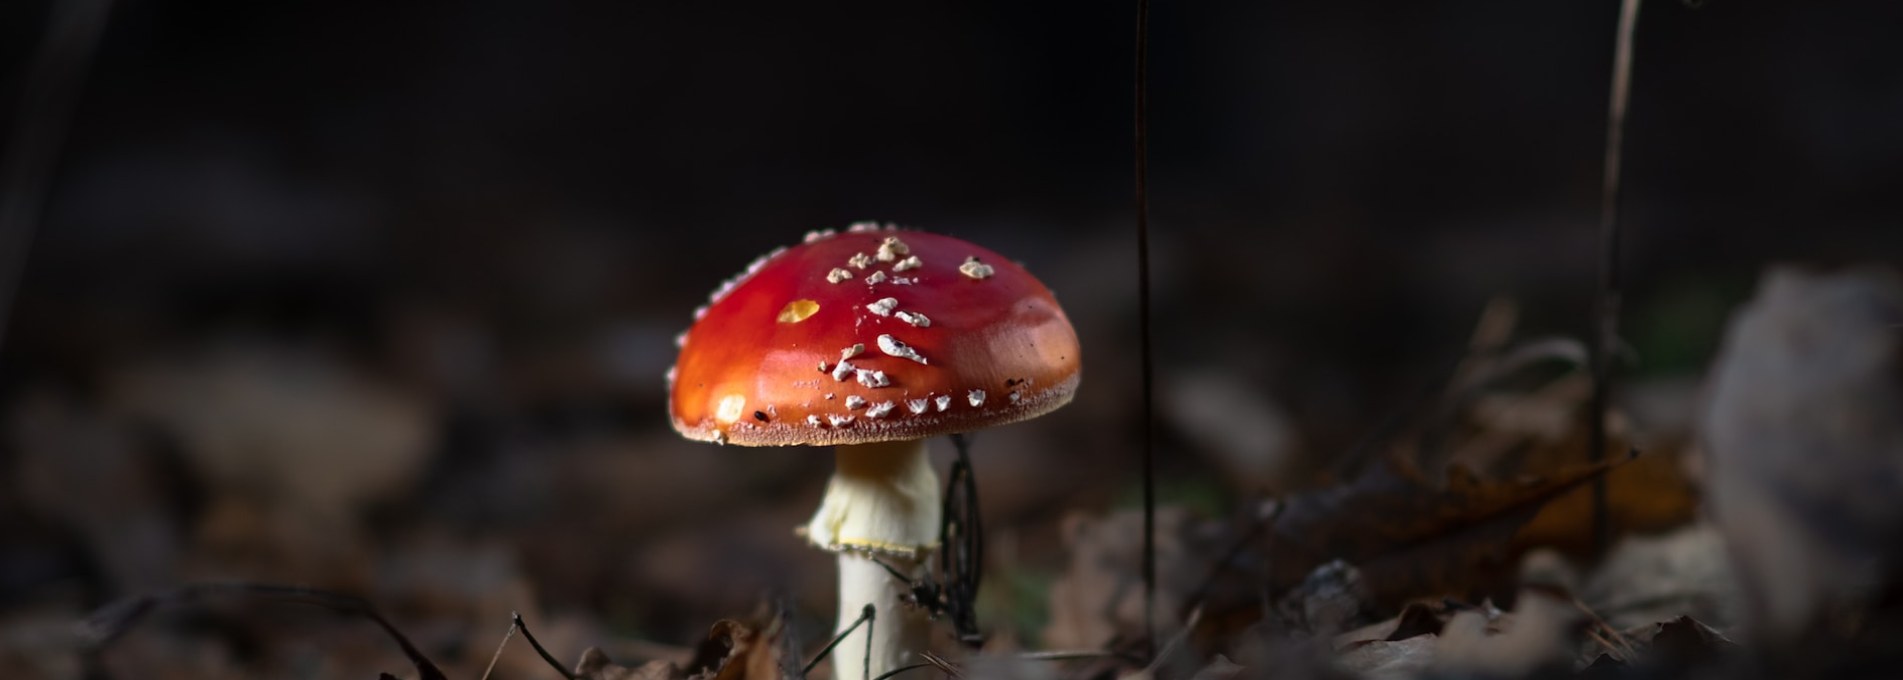 Why Purchase Amanita Muscaria Online